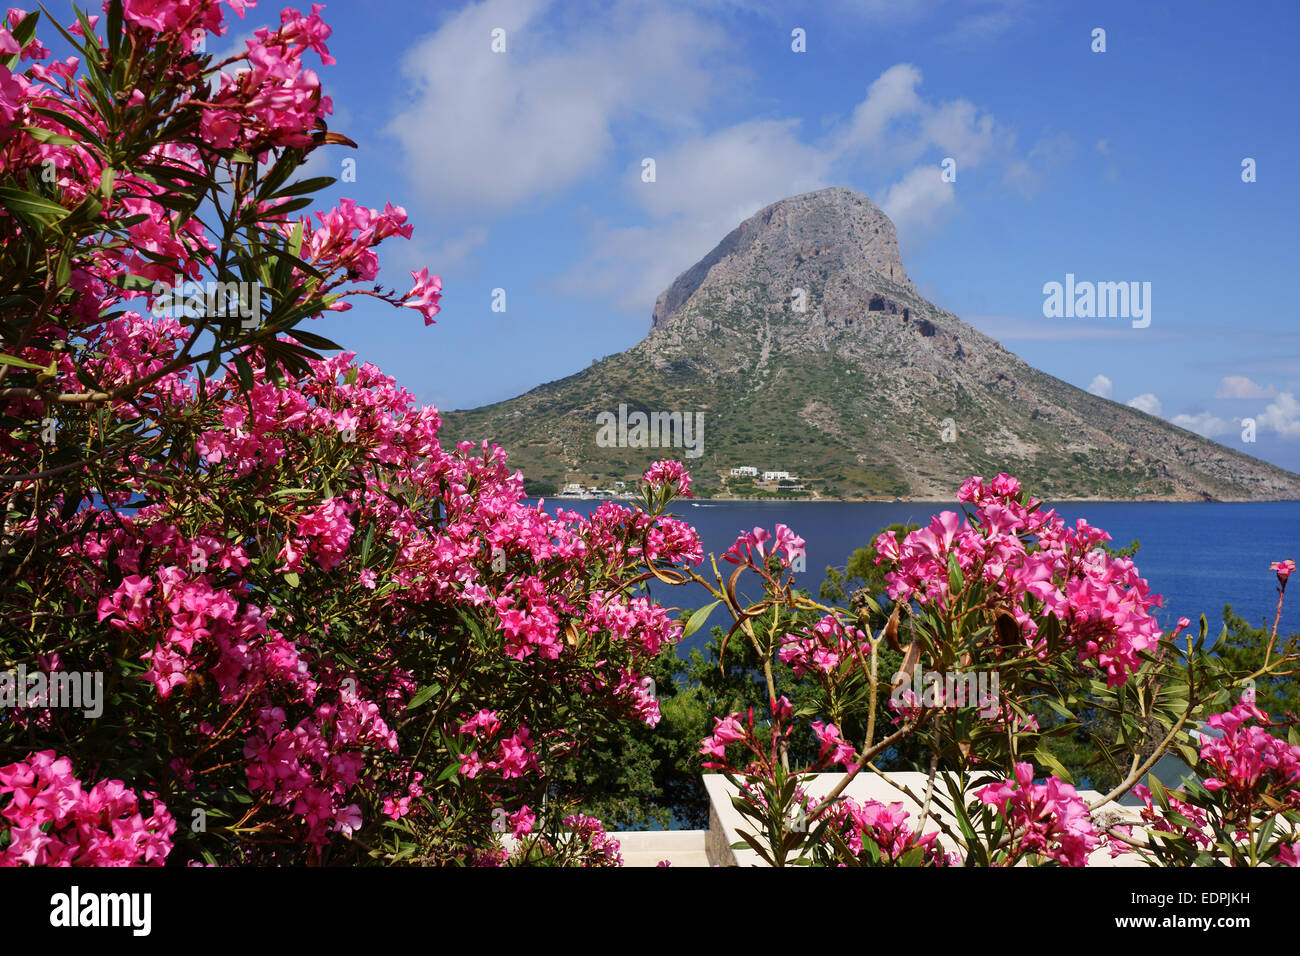 Island Telendos seen from Mirties on Island Kalymnos, with Rhododendron flowers, Greece Stock Photo